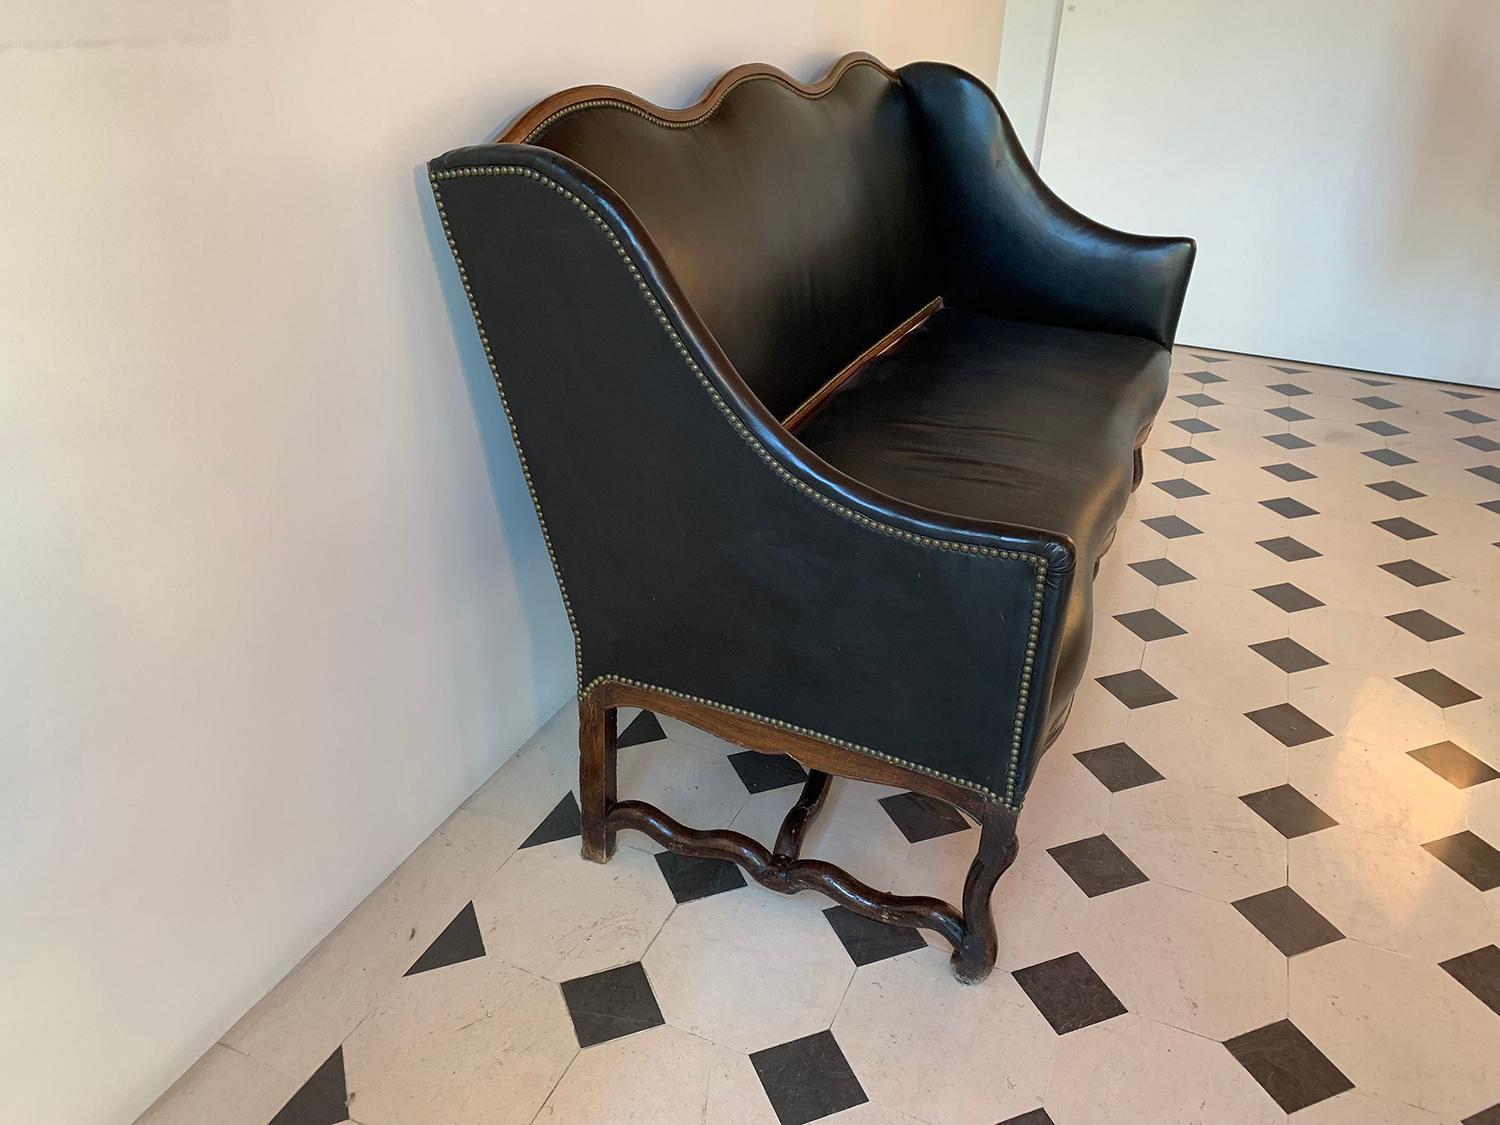 Beautiful Louis XIII style sofa in walnut and black leather. The lining is usable as is, but could be refurbished (information and specifications for new lining, on request).

Magnifique canapé de style Louis XIll en Noyer et cuir noir. Le